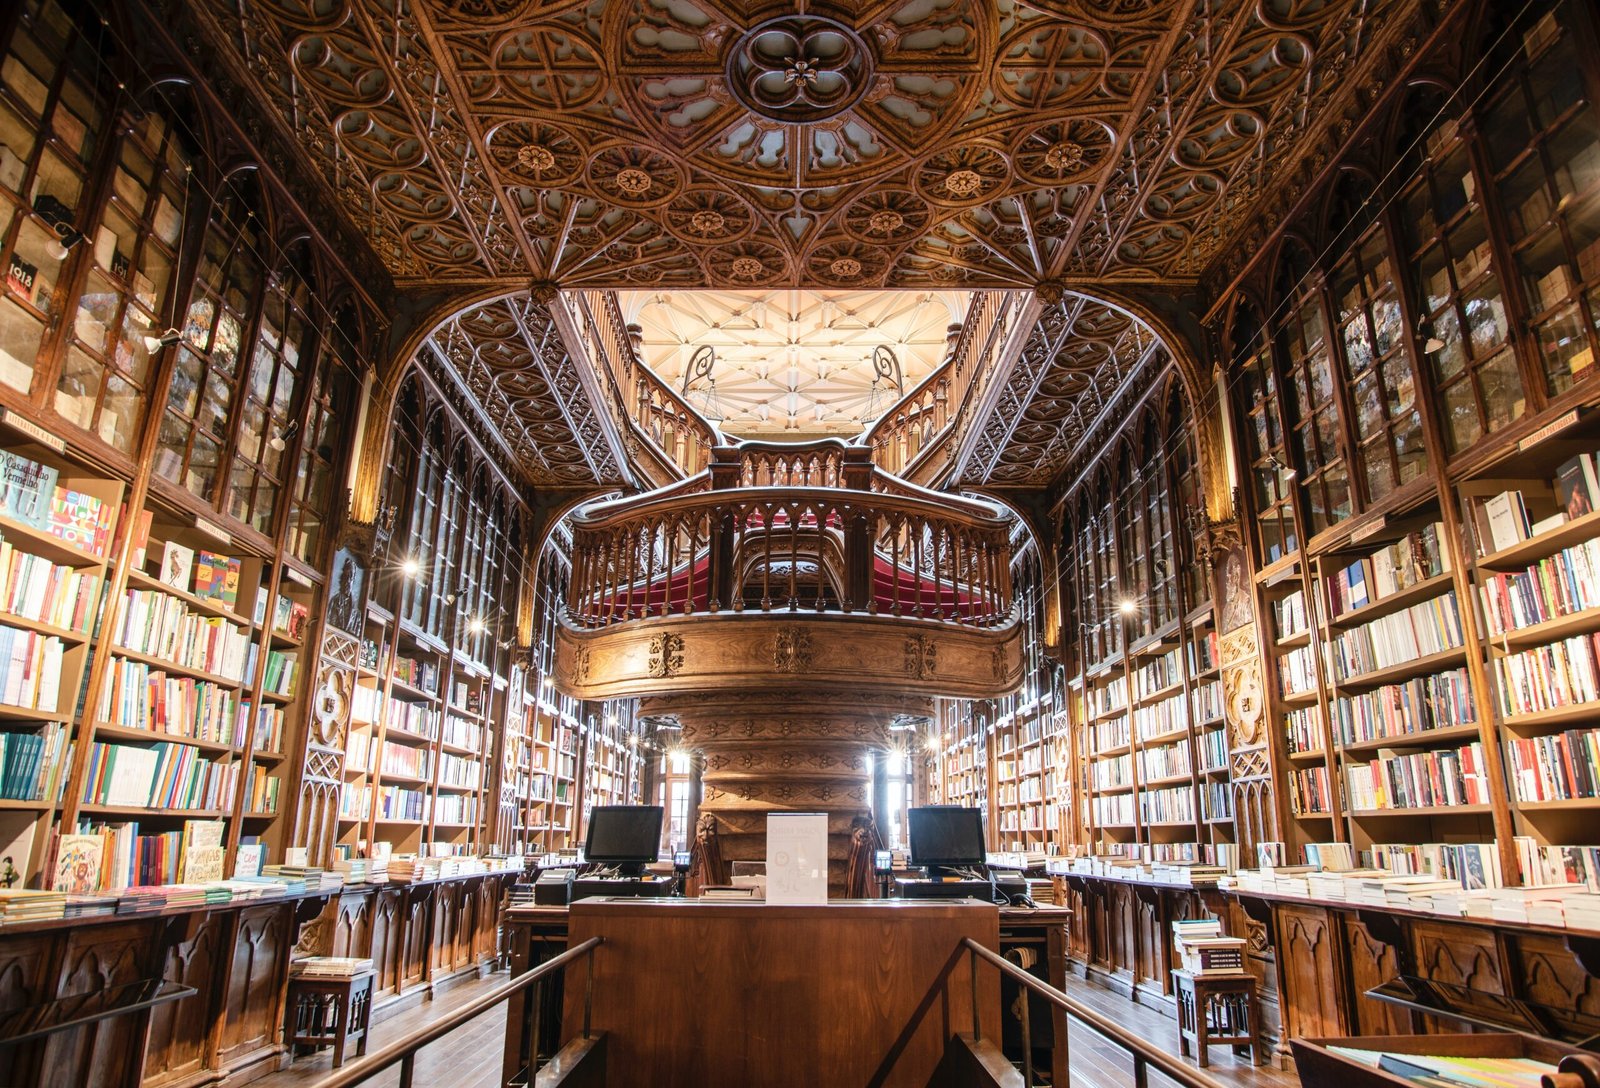 An old and intricate wooden library, filled with books